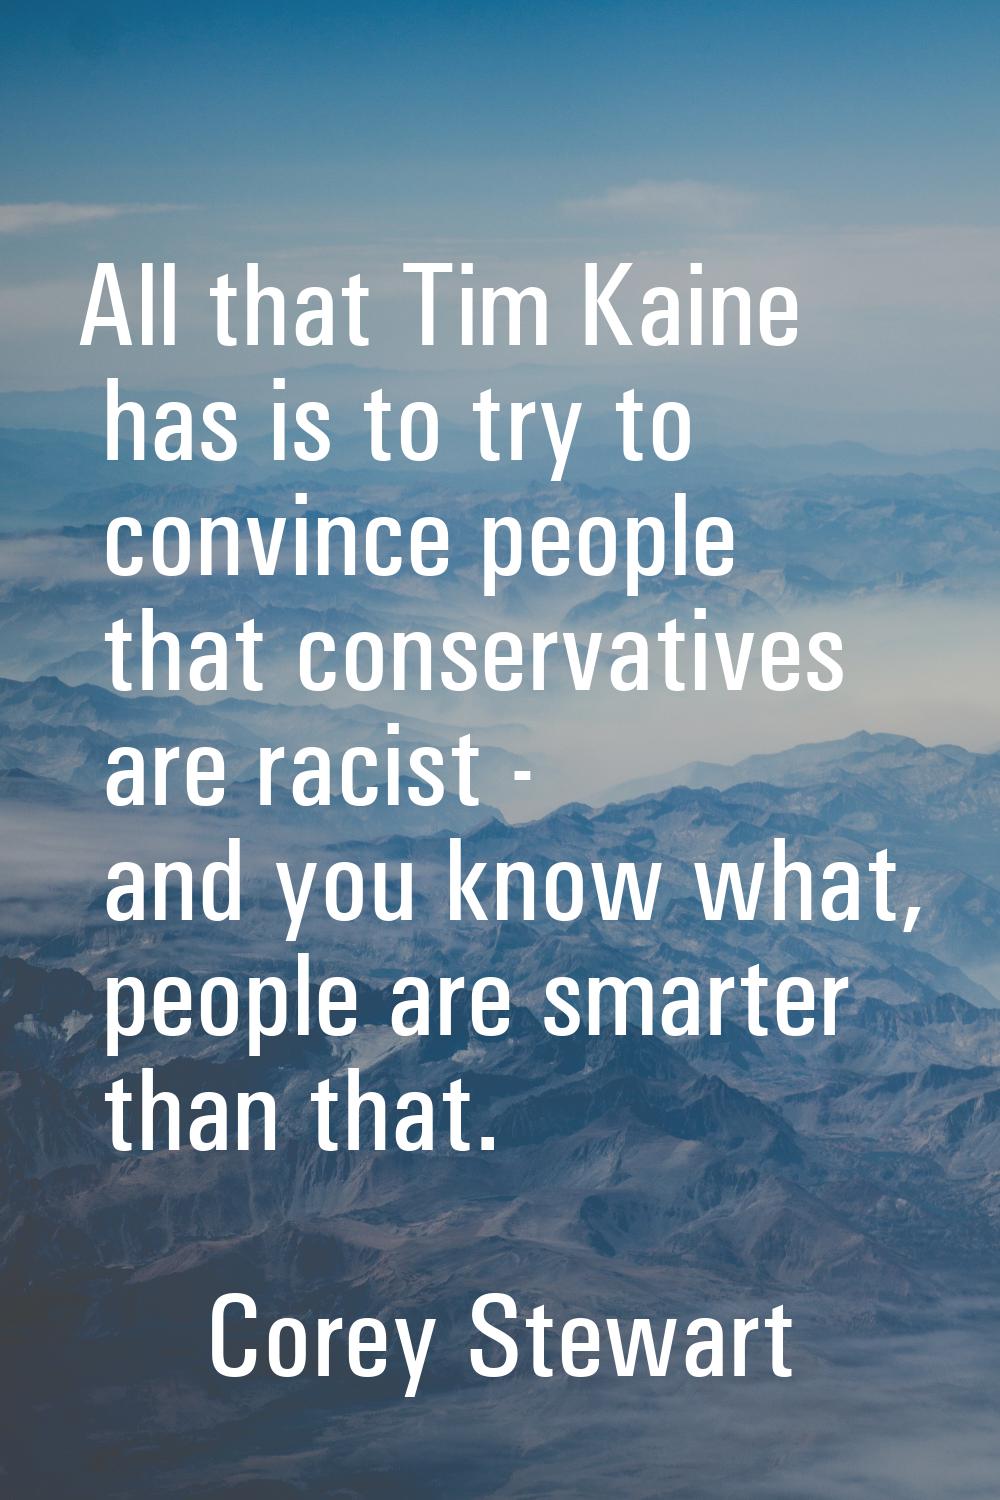 All that Tim Kaine has is to try to convince people that conservatives are racist - and you know wh